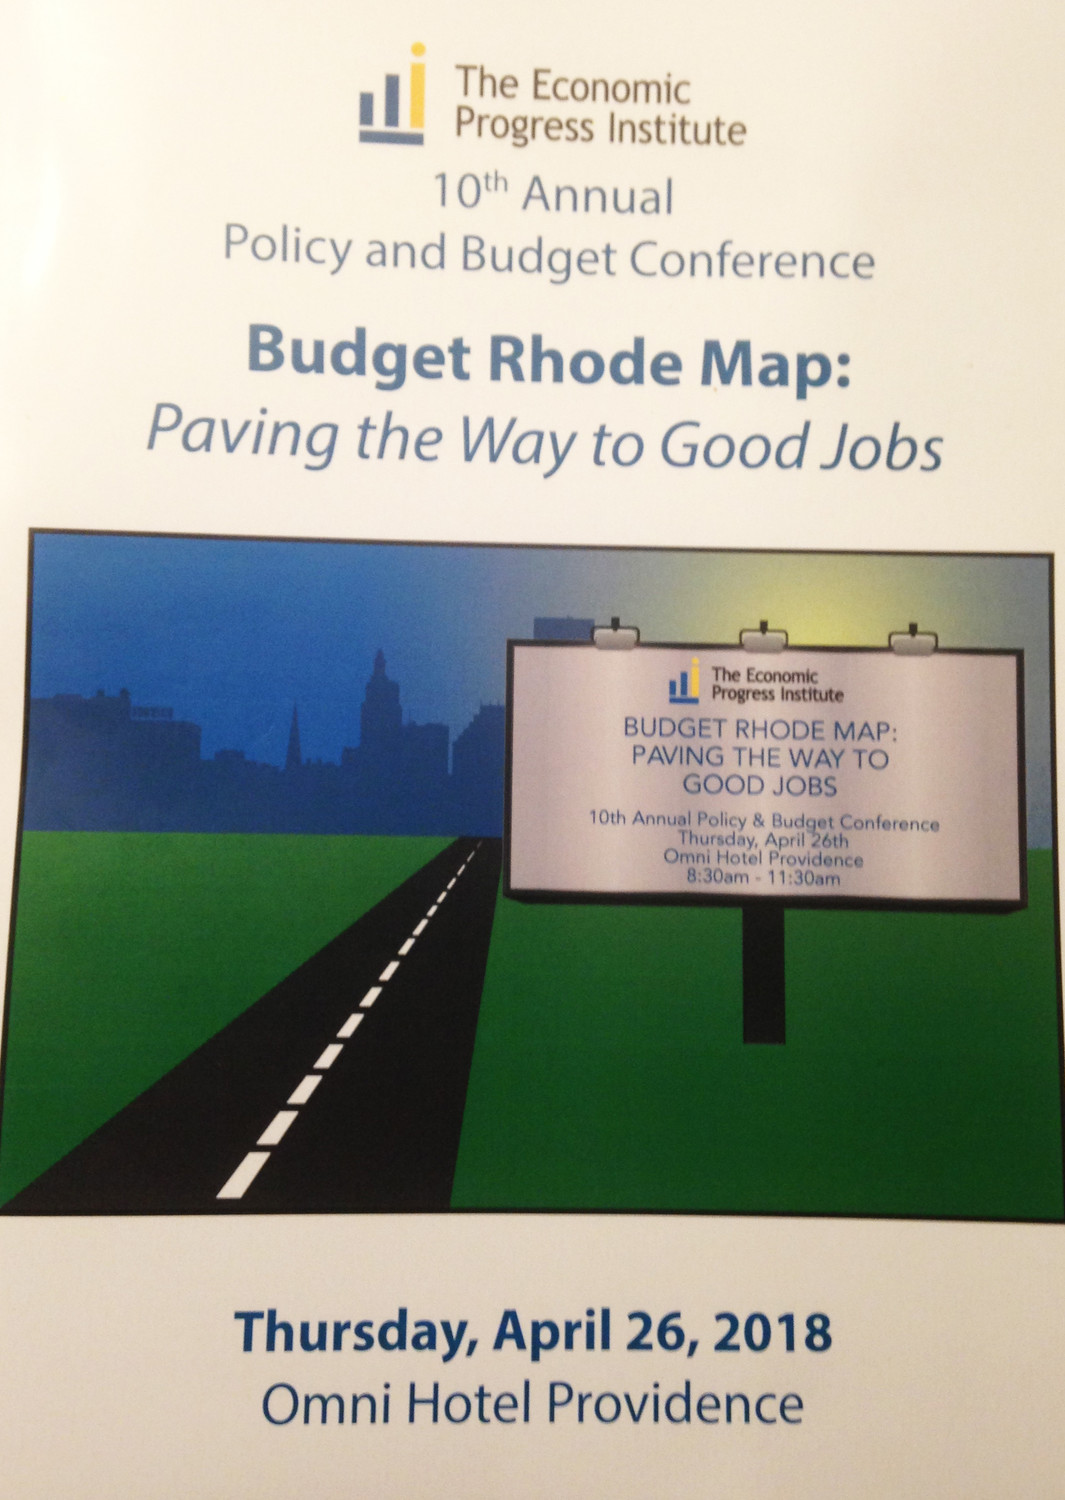 The program cover for the 10th annual policy and budget conference hosted by the Economic Progress Institute.